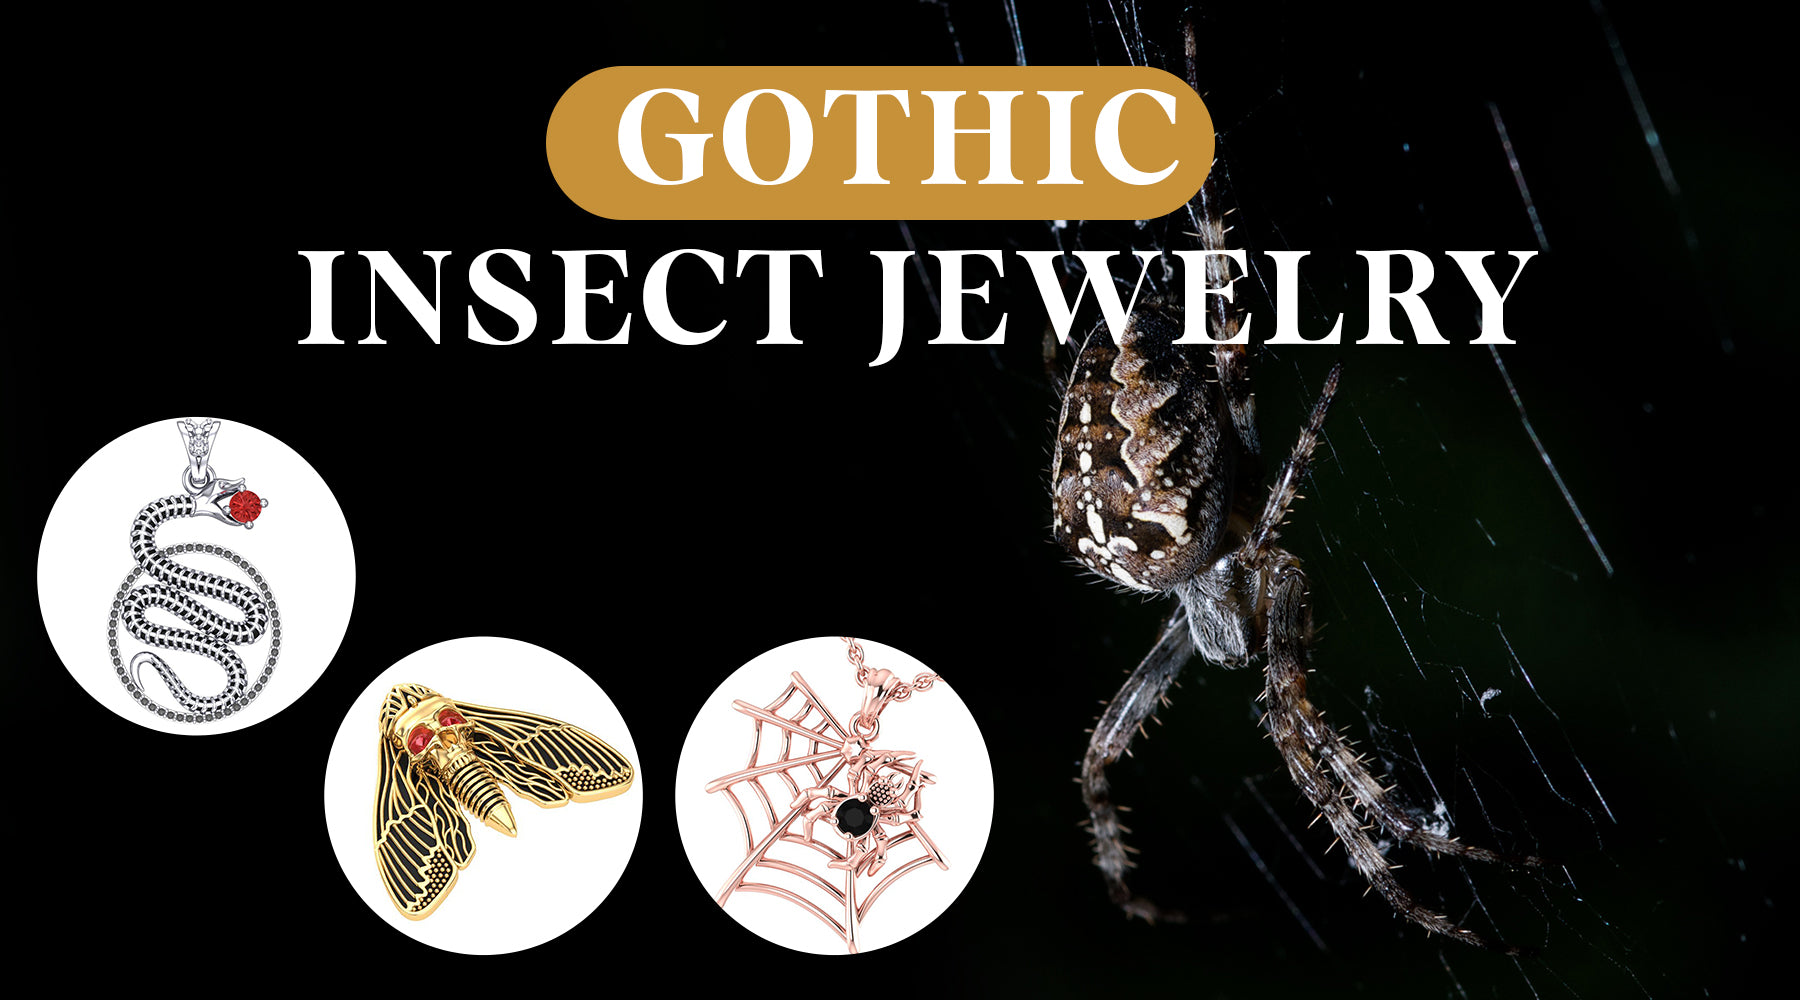 What role do insects play in Gothic insect jewelry?